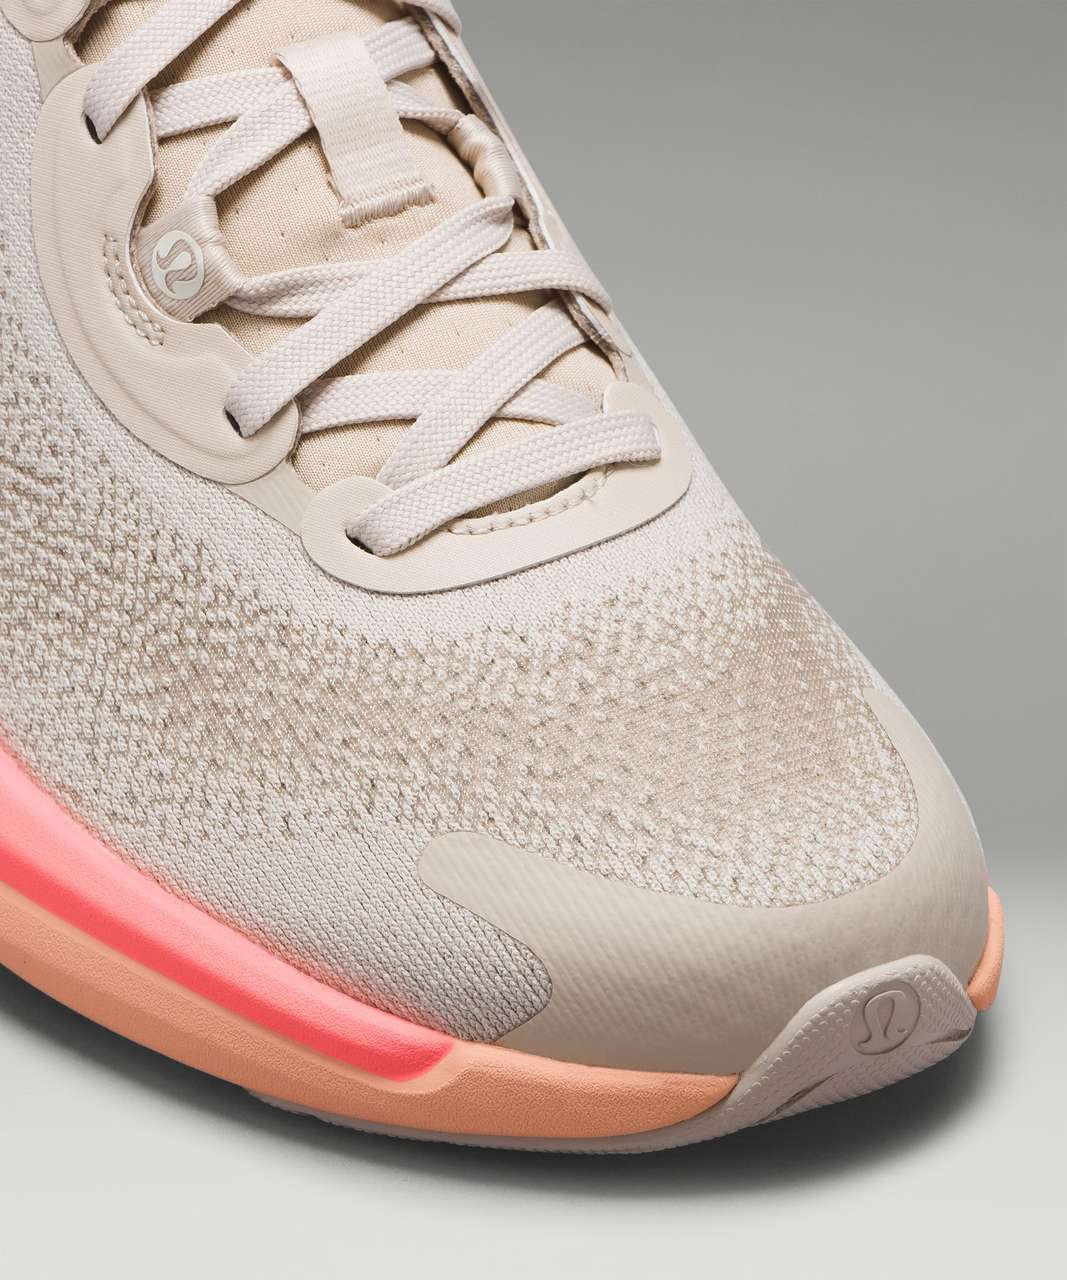 Lululemon Chargefeel 2 Low Womens Workout Shoe - Baked Clay / Peach Fuzz / Sunset